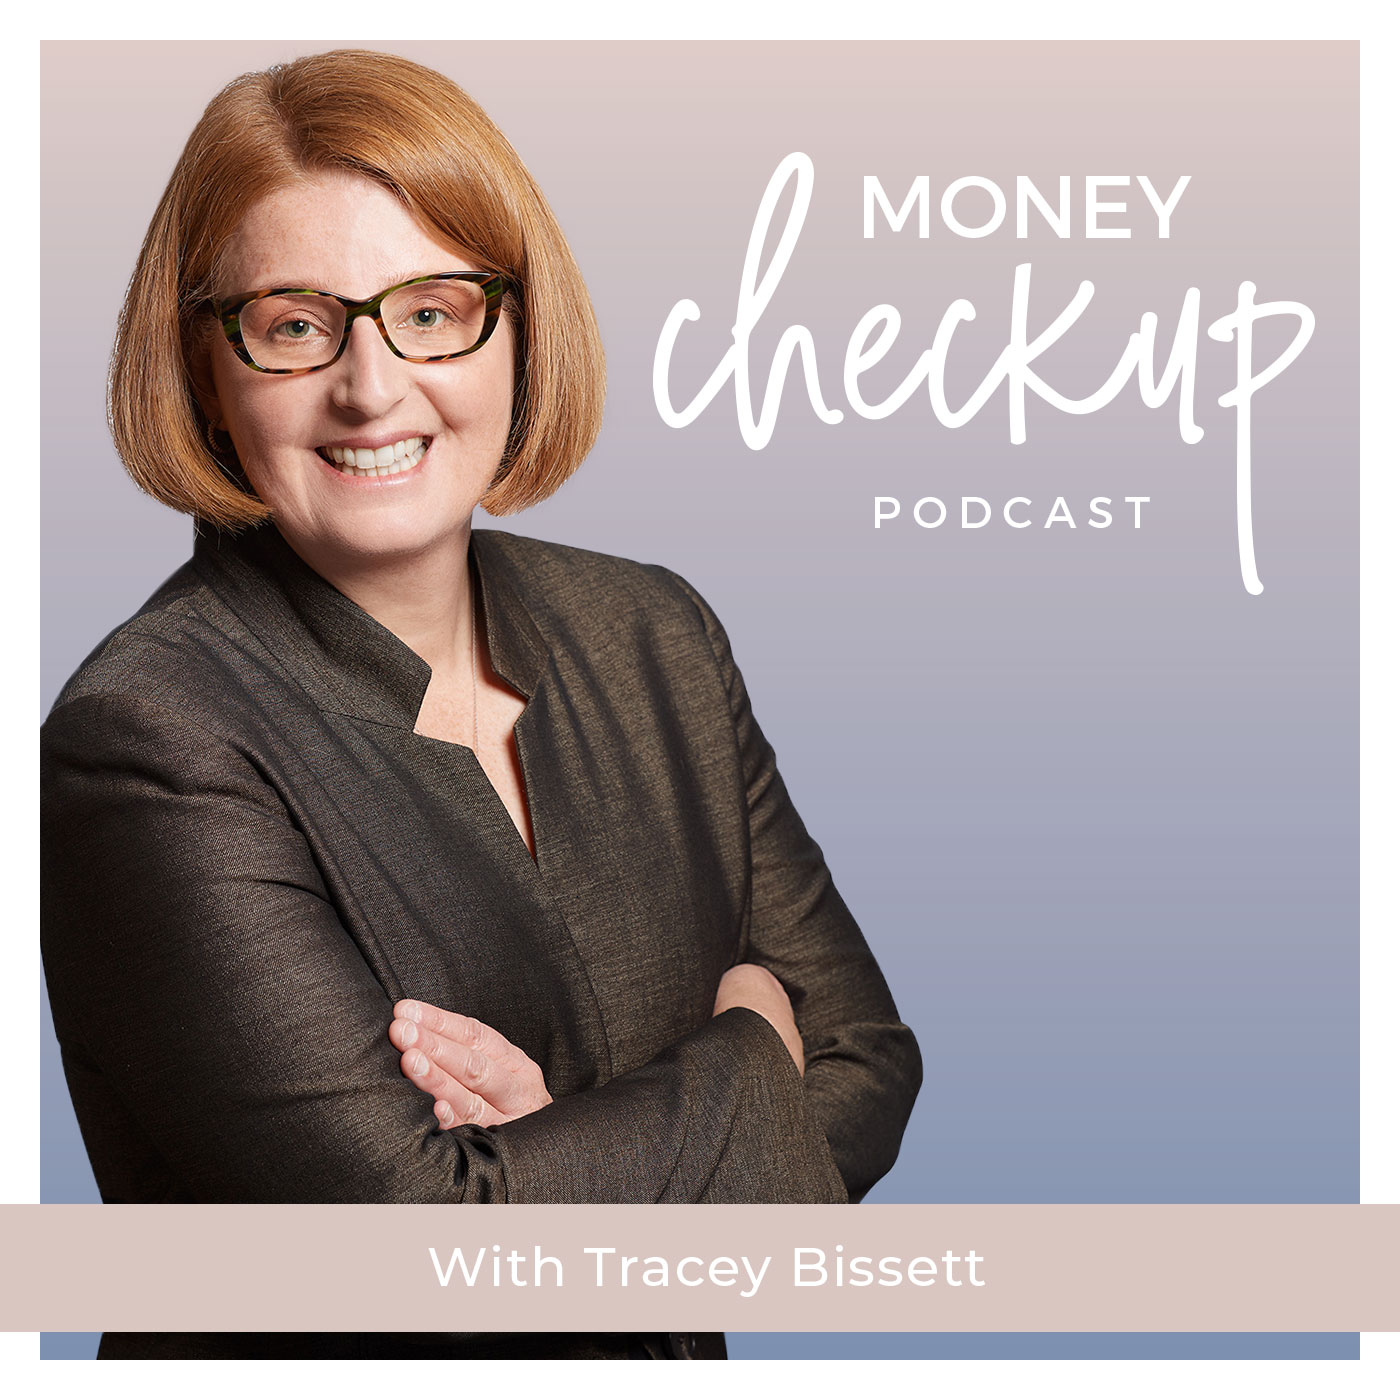 Money Checkup Podcast With Tracey Bissett